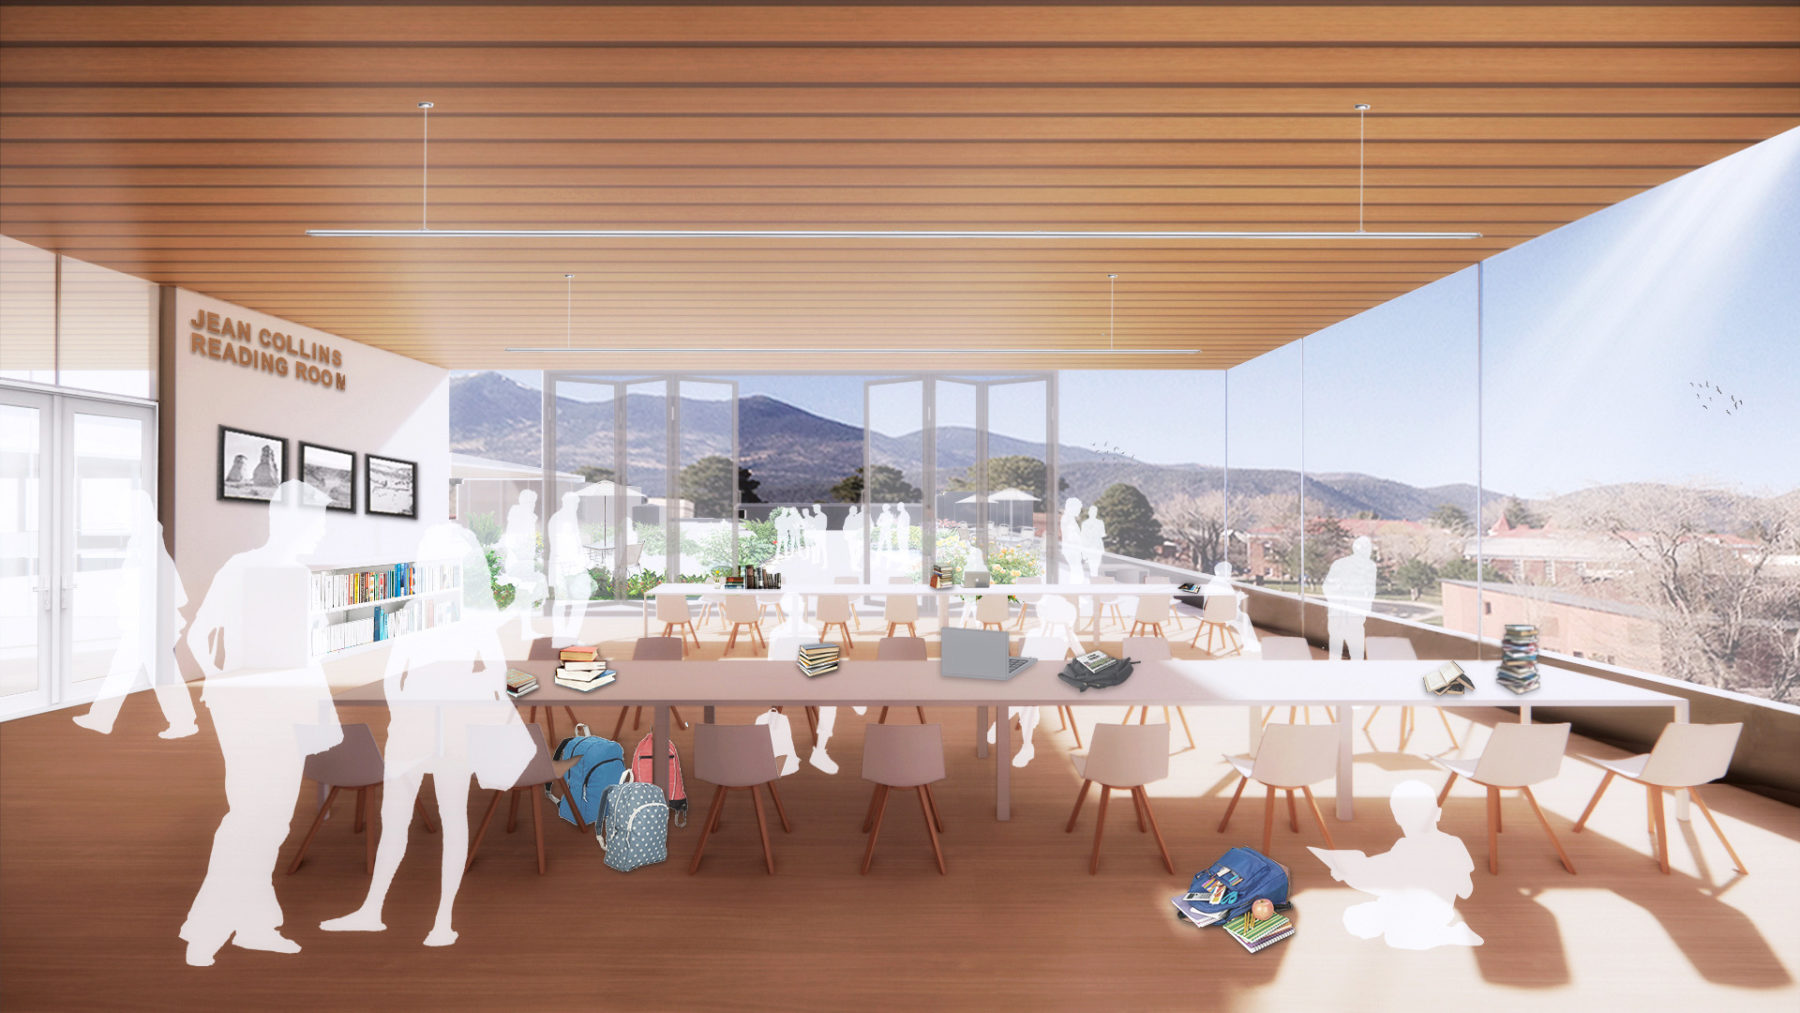 interior rendering of the reading room. Large tables with students and windows that overlook the mountain landscape